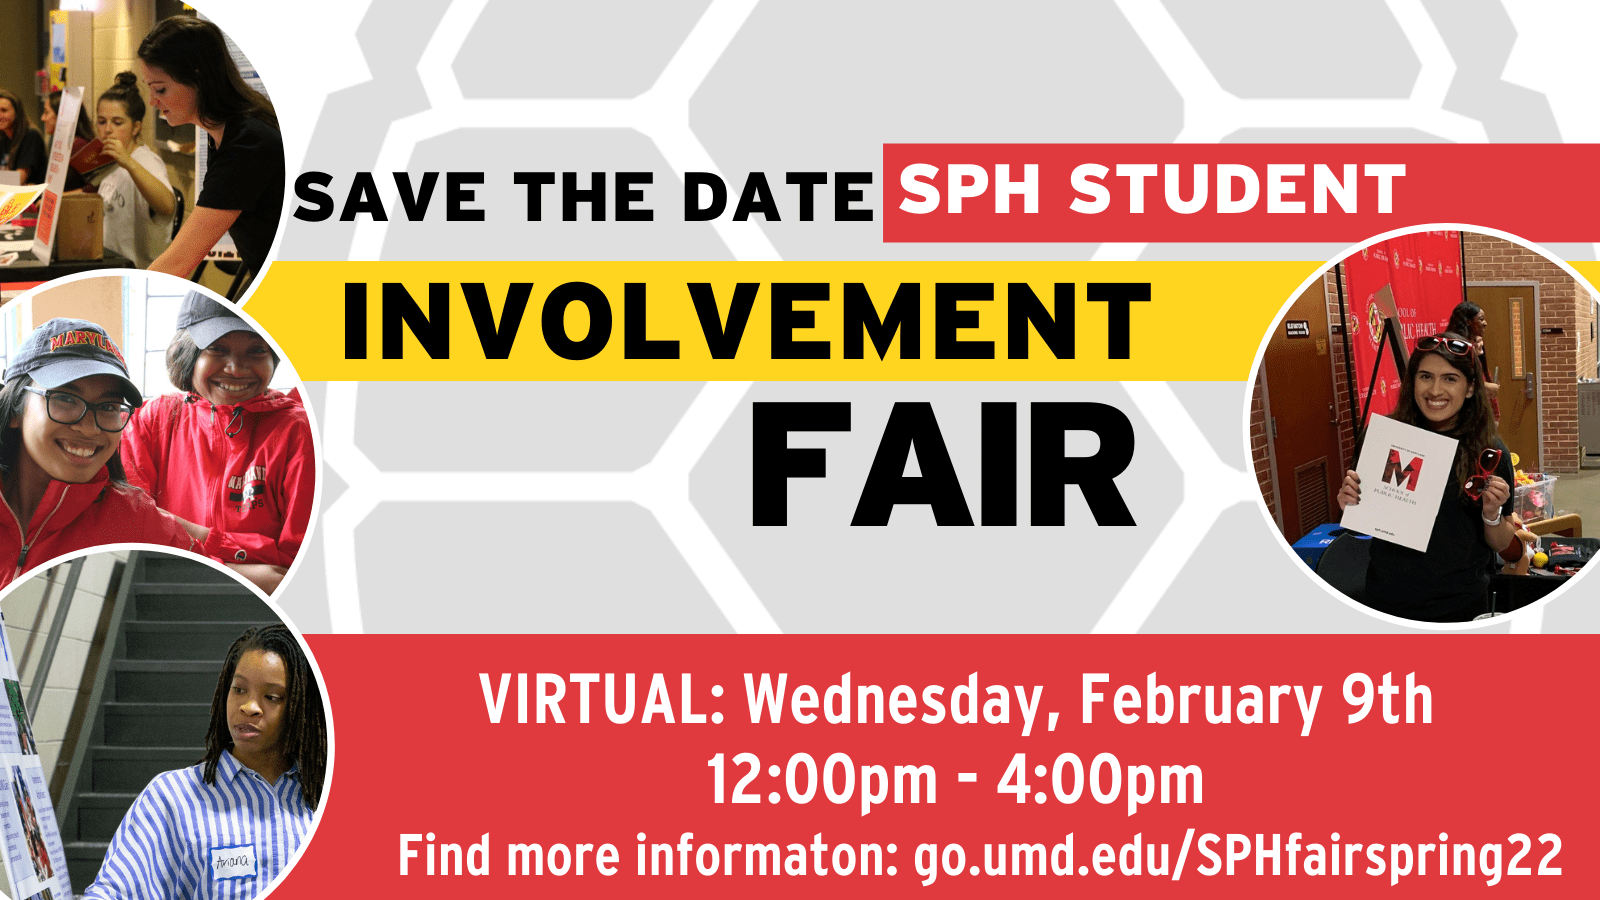 Save the Date: February 9, 2022 from 12:00pm - 4:00pm